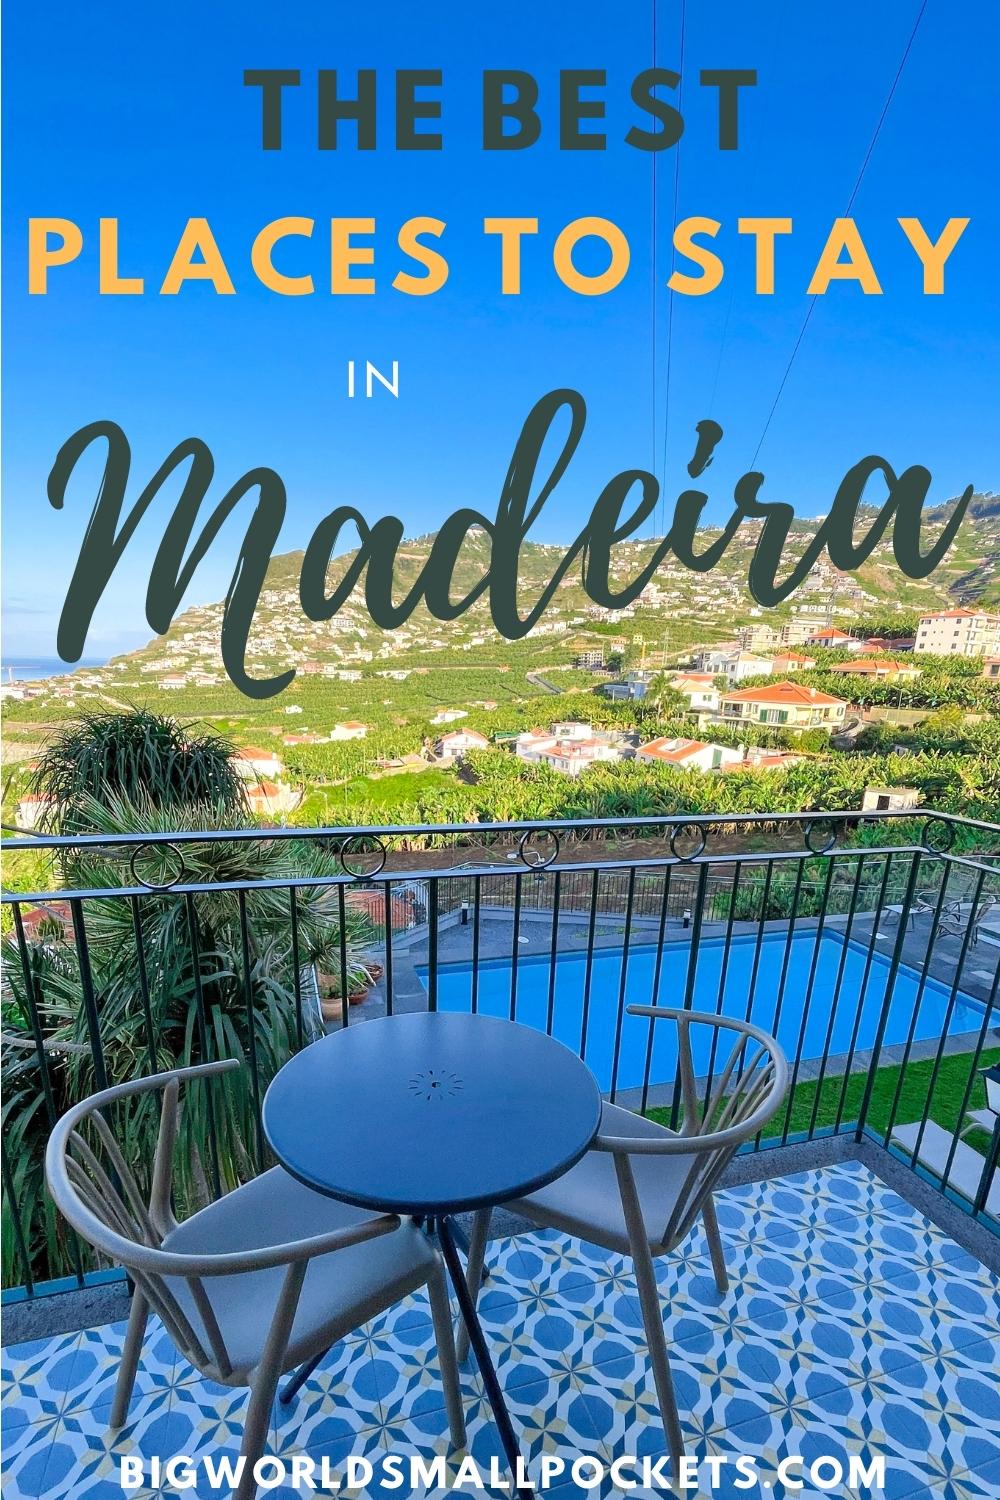 The Best Places to Stay in Madeira